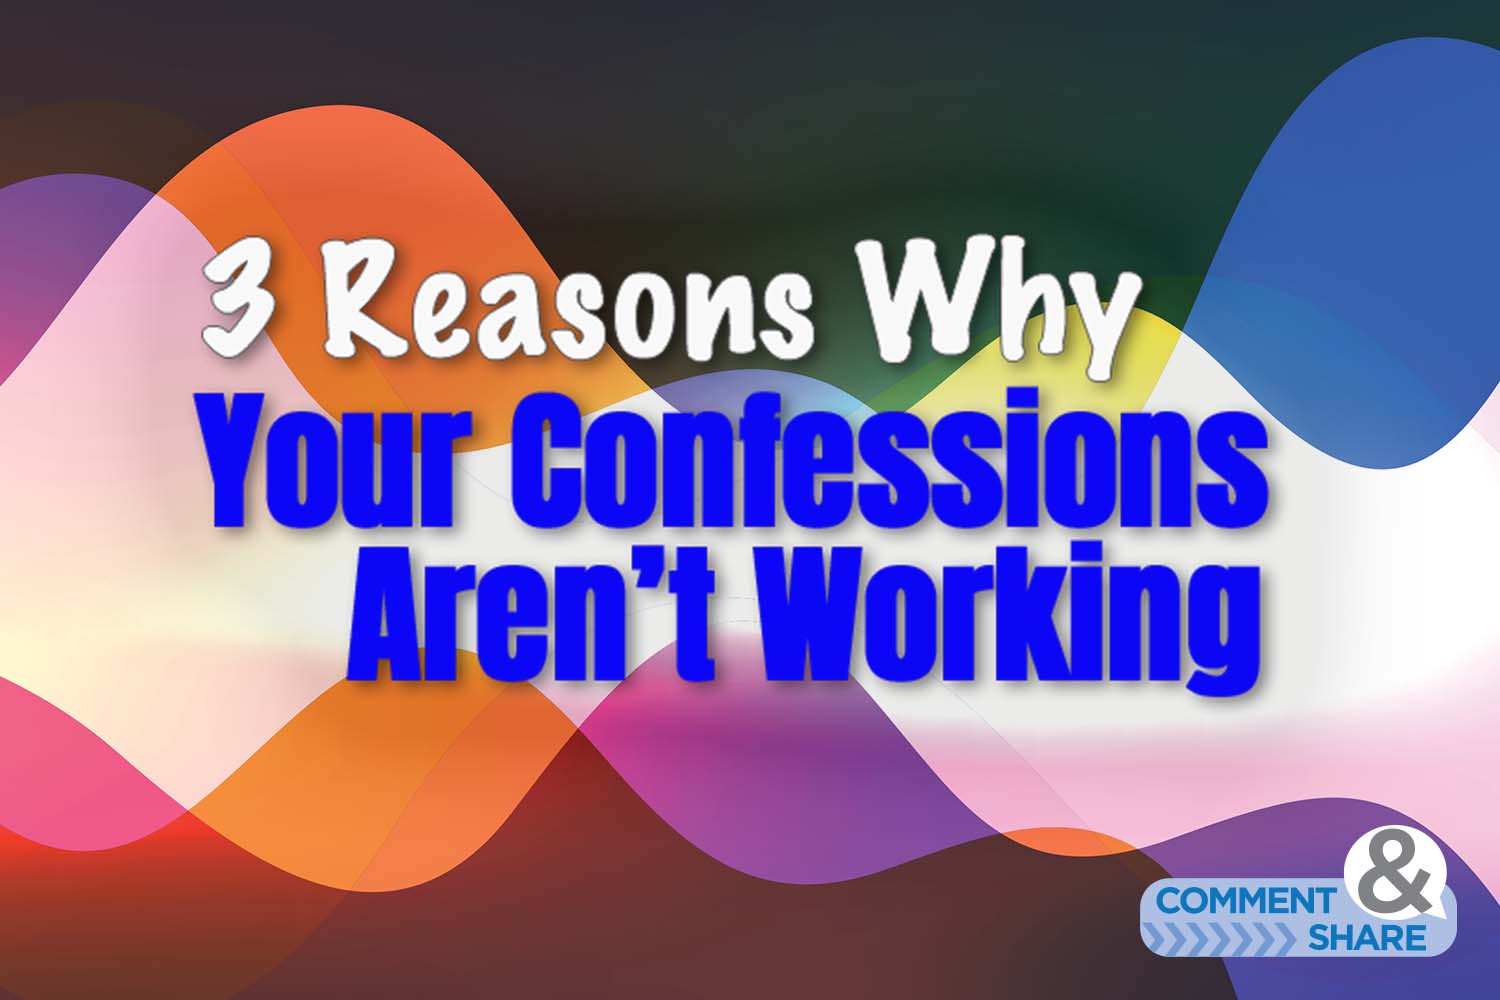 3 Reasons Why Your Confessions Aren't Working